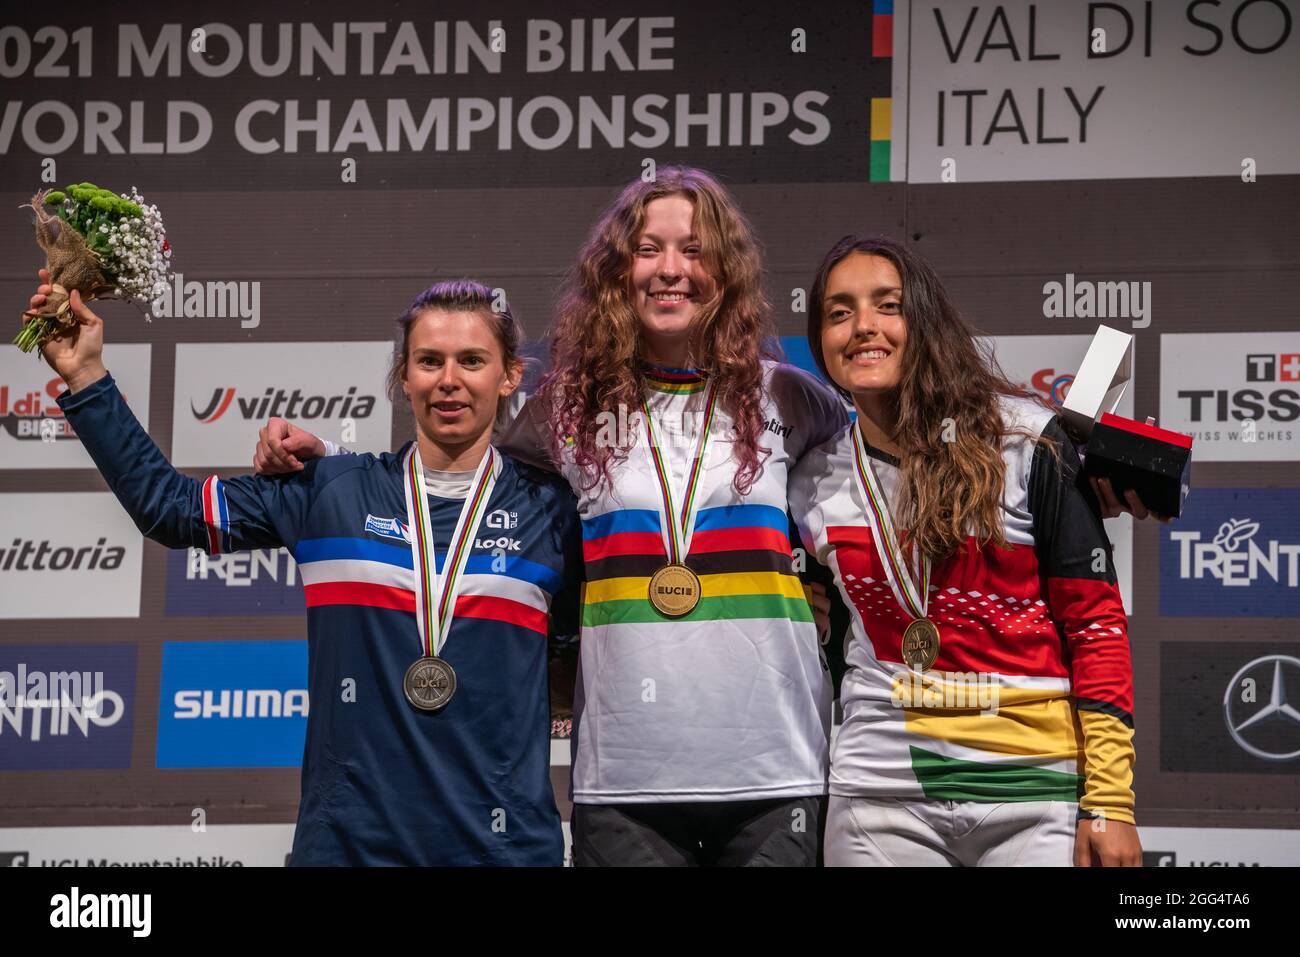 Womens podium during the Four Cross (4X), 2021 MTB World Championships, 1st place Michaela HAJKOVA of the Czech Cepublic, 2nd place Mathilde BERNARD of France, 3rd place Anna Sara ROJAS of Bolivia, Mountain Bike cycling event on August 27, 2021 in Val Di Sole, Italy - Photo Olly Bowman / DPPI Stock Photo